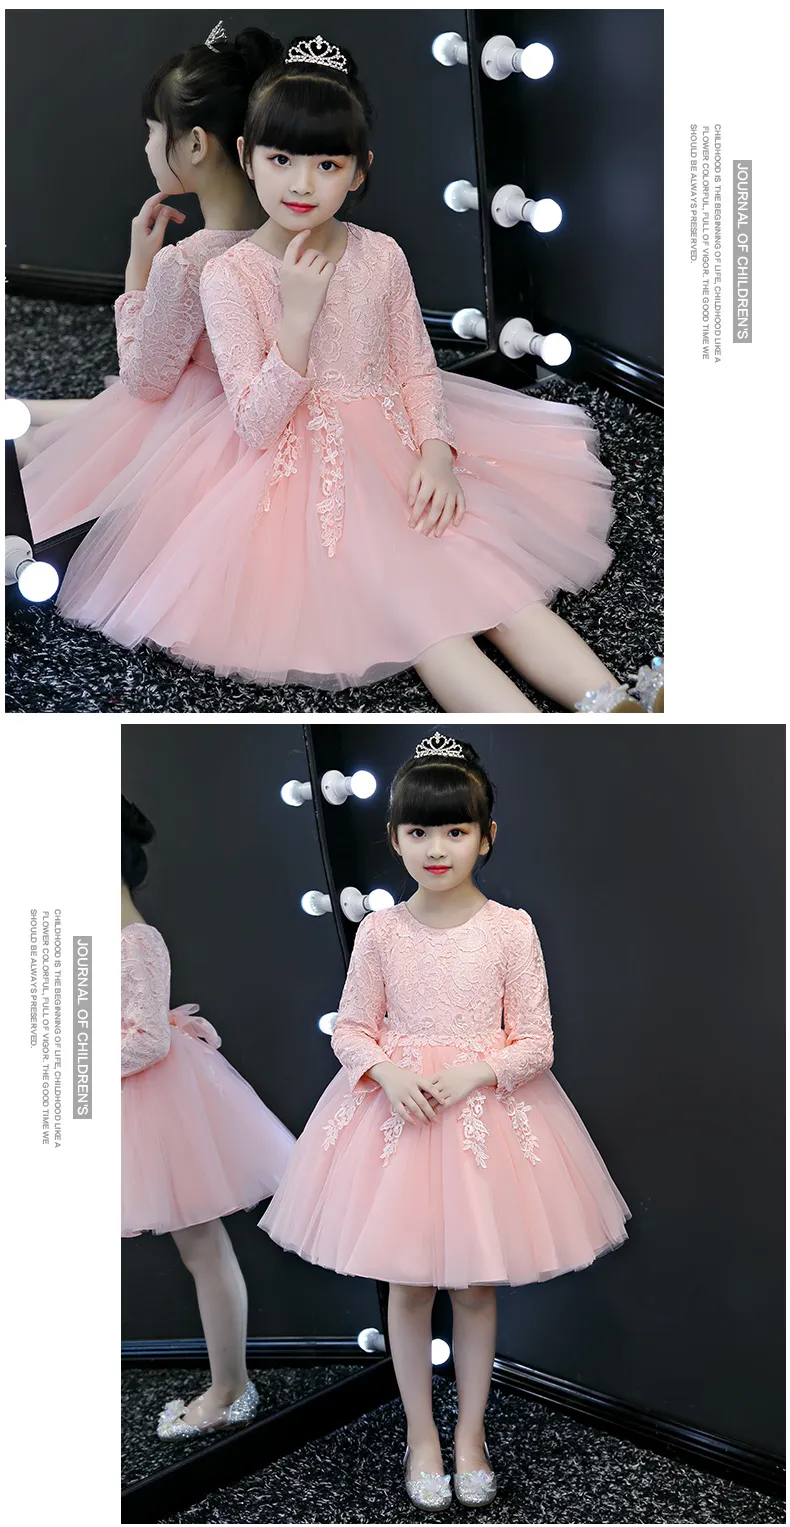 LINDA NEW Christening dresses payment link perfect 700 MNVN highest quality Free DHL EMS For any two Pairs double box''gg''JRZ6